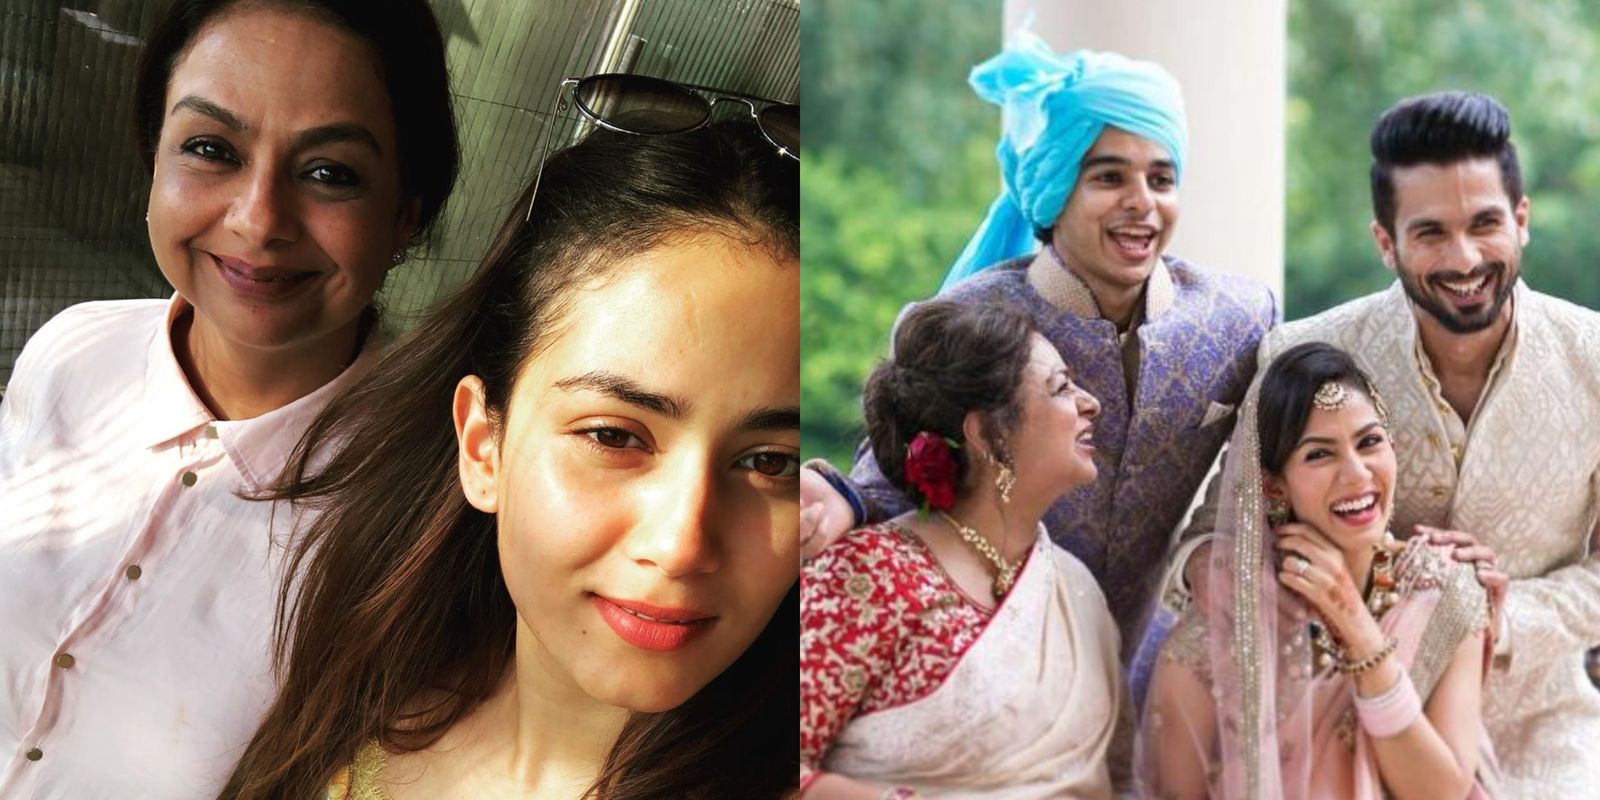 Shahid Kapoor’s Mother Neelima Azim Reveals Her Initial Thoughts After Meeting Mira Rajput For The First Time